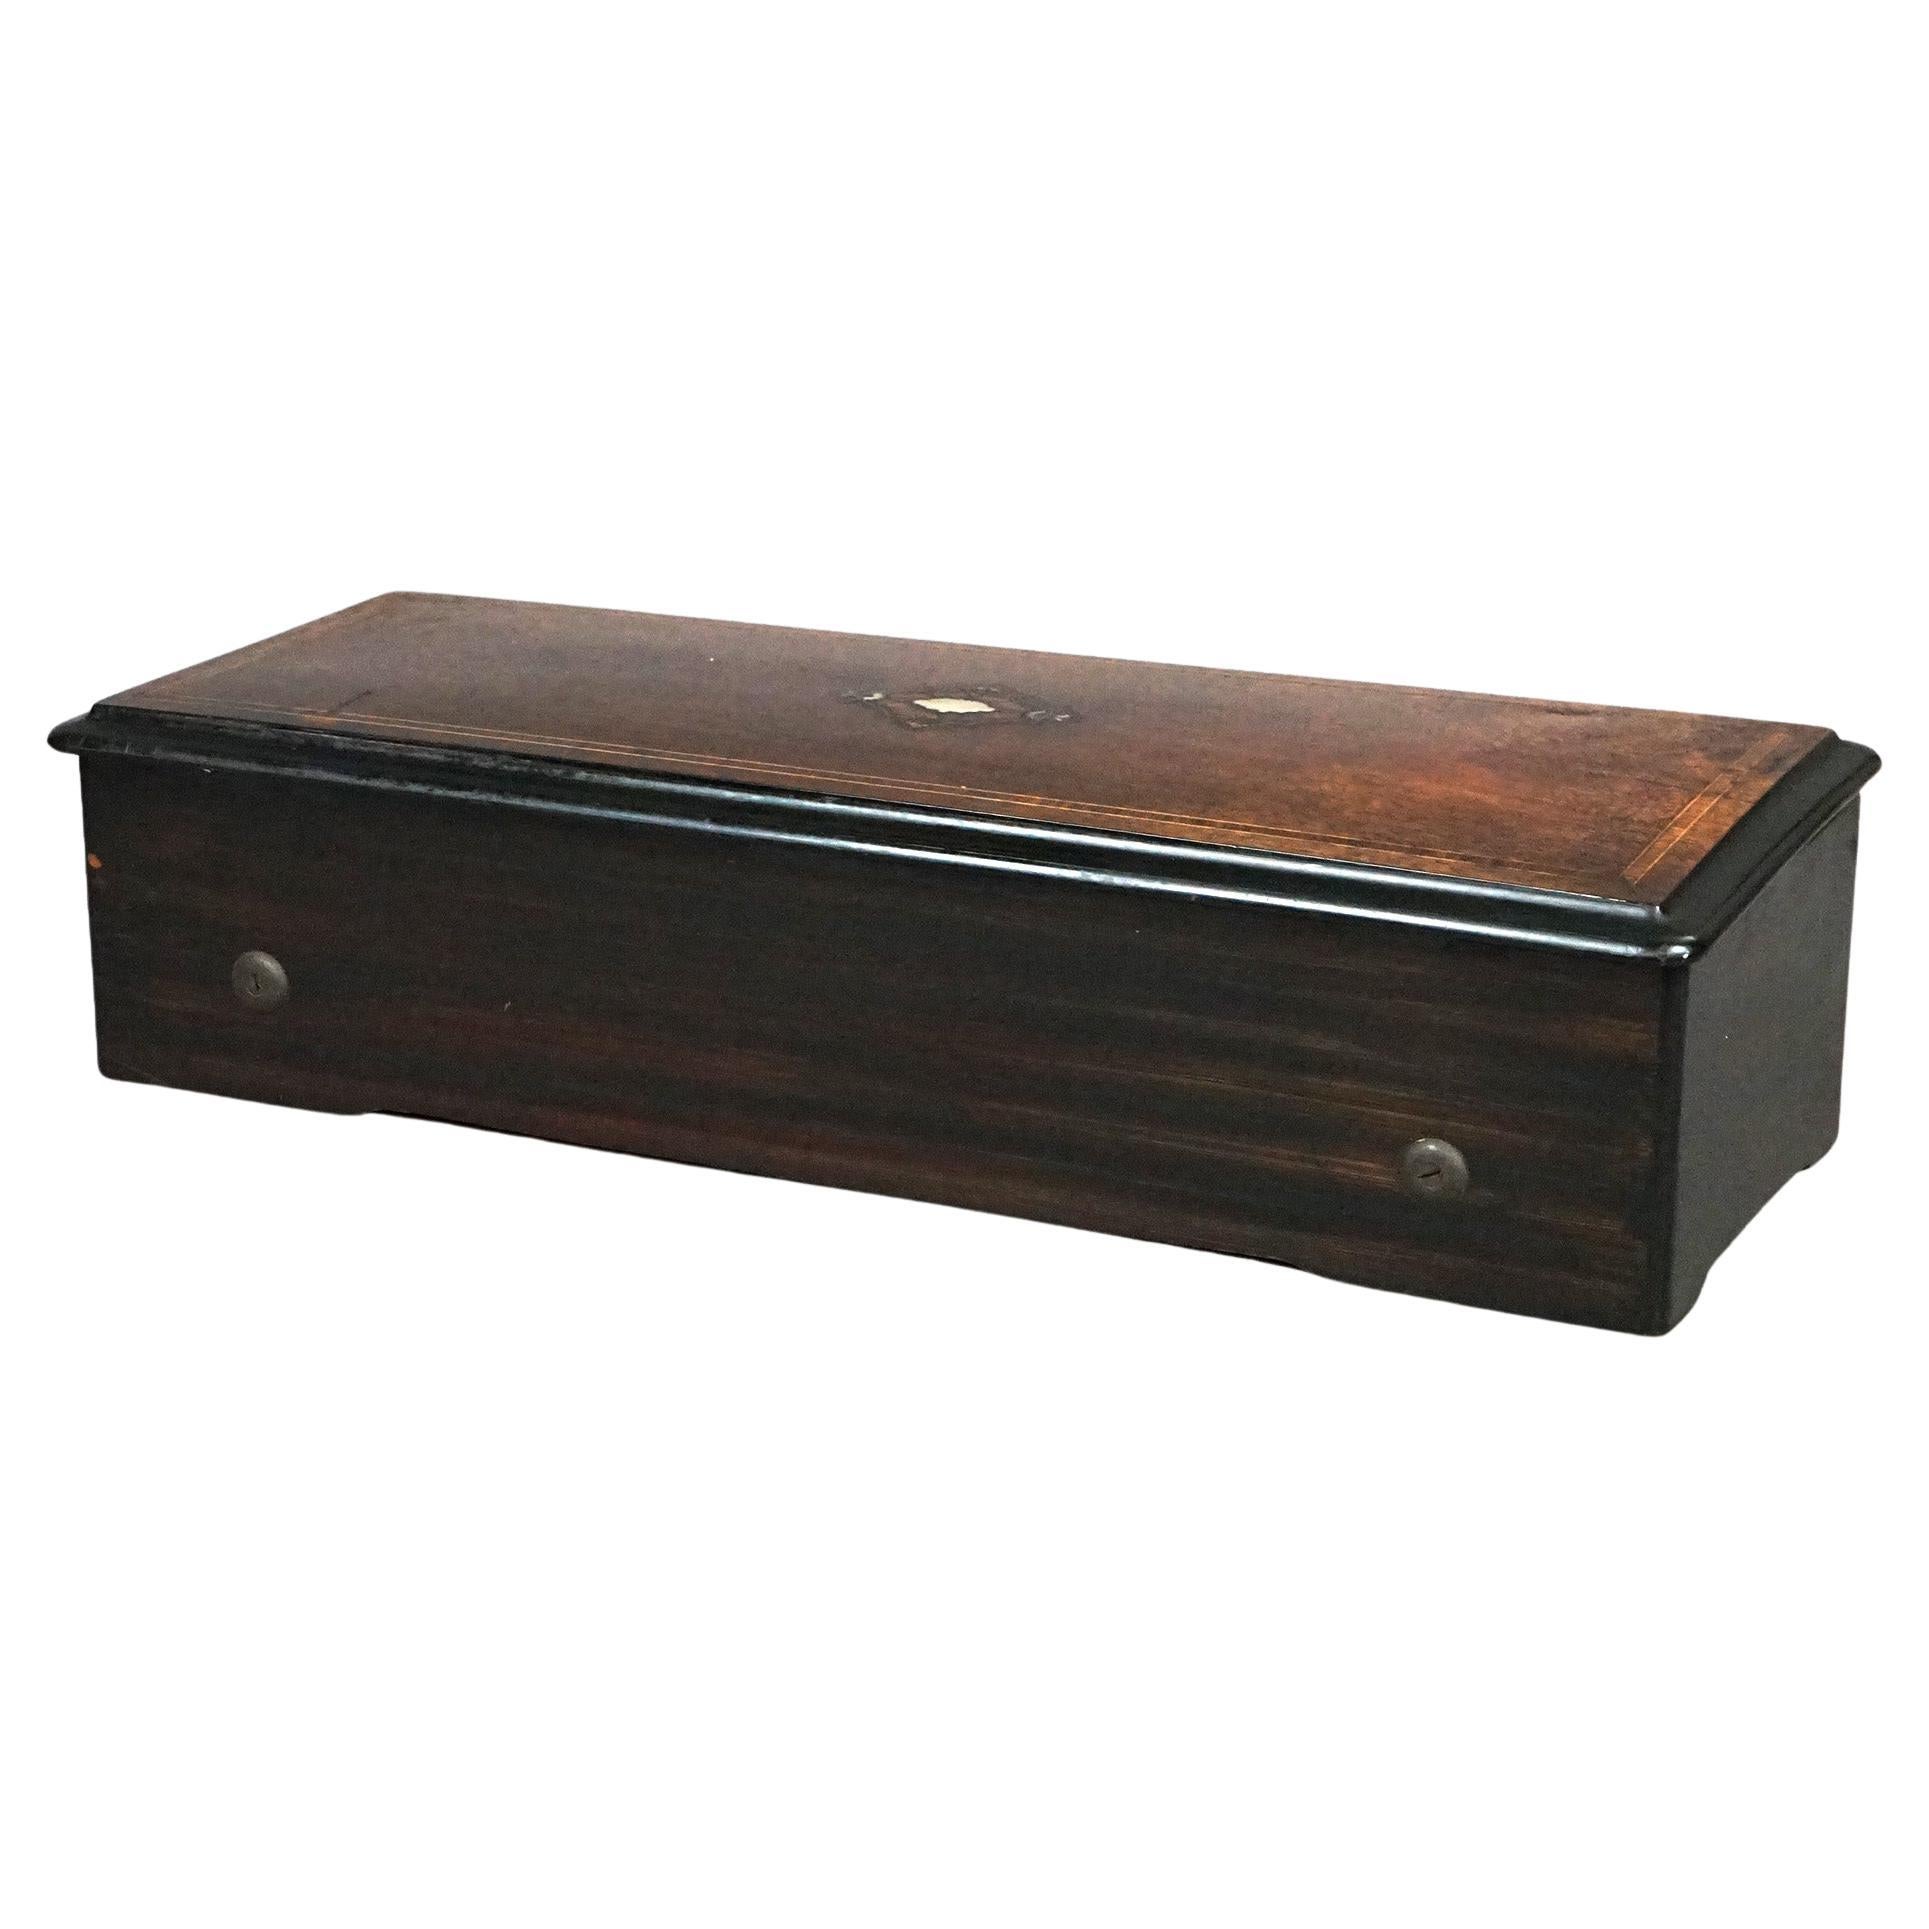 An antique Swiss standard twelve tune music box offers rosewood case with ebonized trimming and mother of pearl inlay, c1890

Measures- 13.25'' H x 23.25'' W x 8.75'' D.